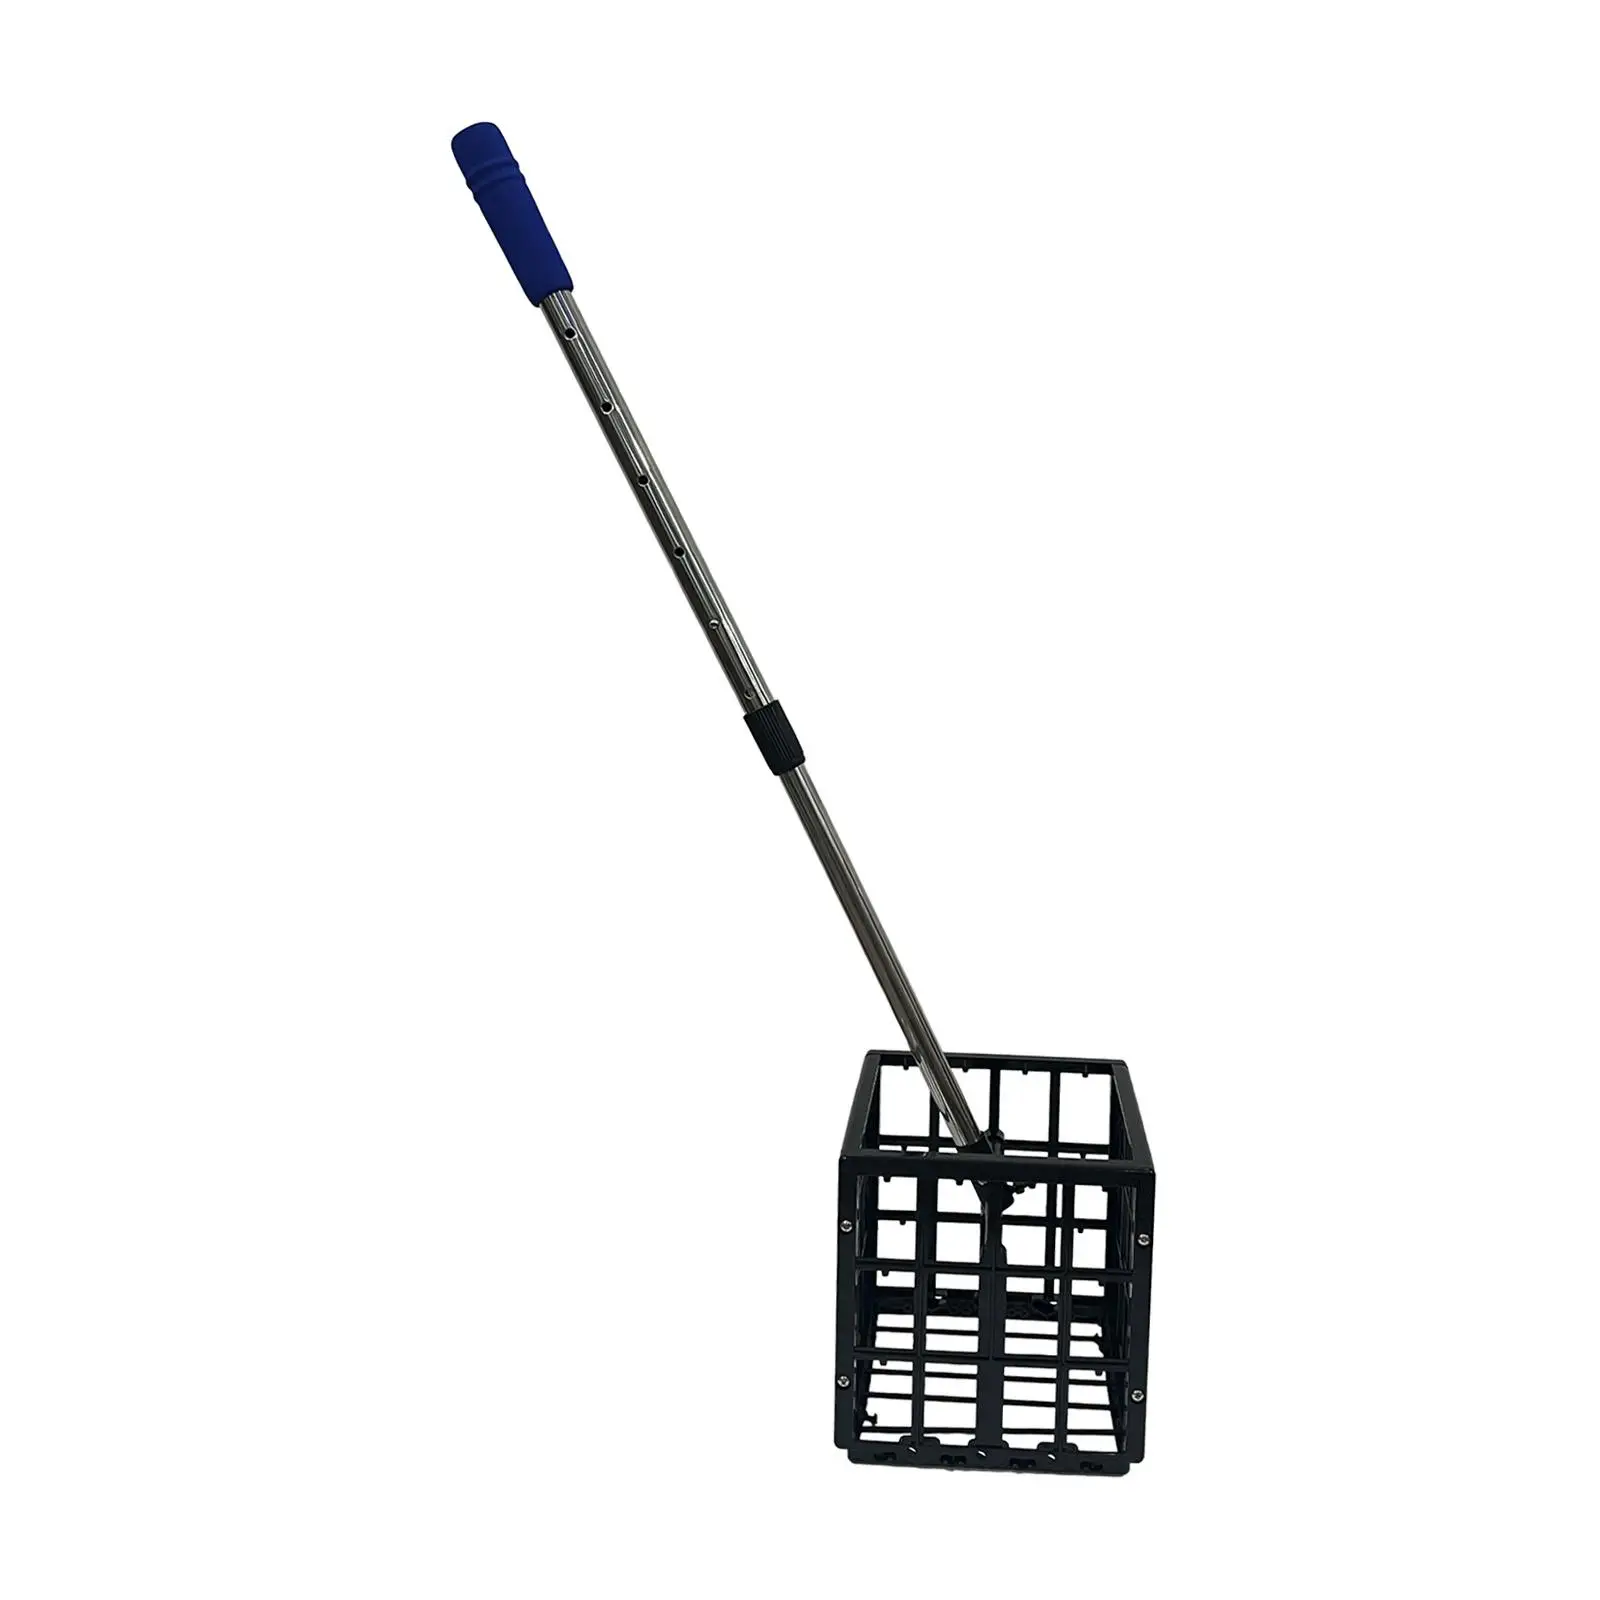 Telescopic Golf Ball Picker Retriever Accessories Lightweight Comfortable to Hold Picking Container for Daily Ball Picking Work